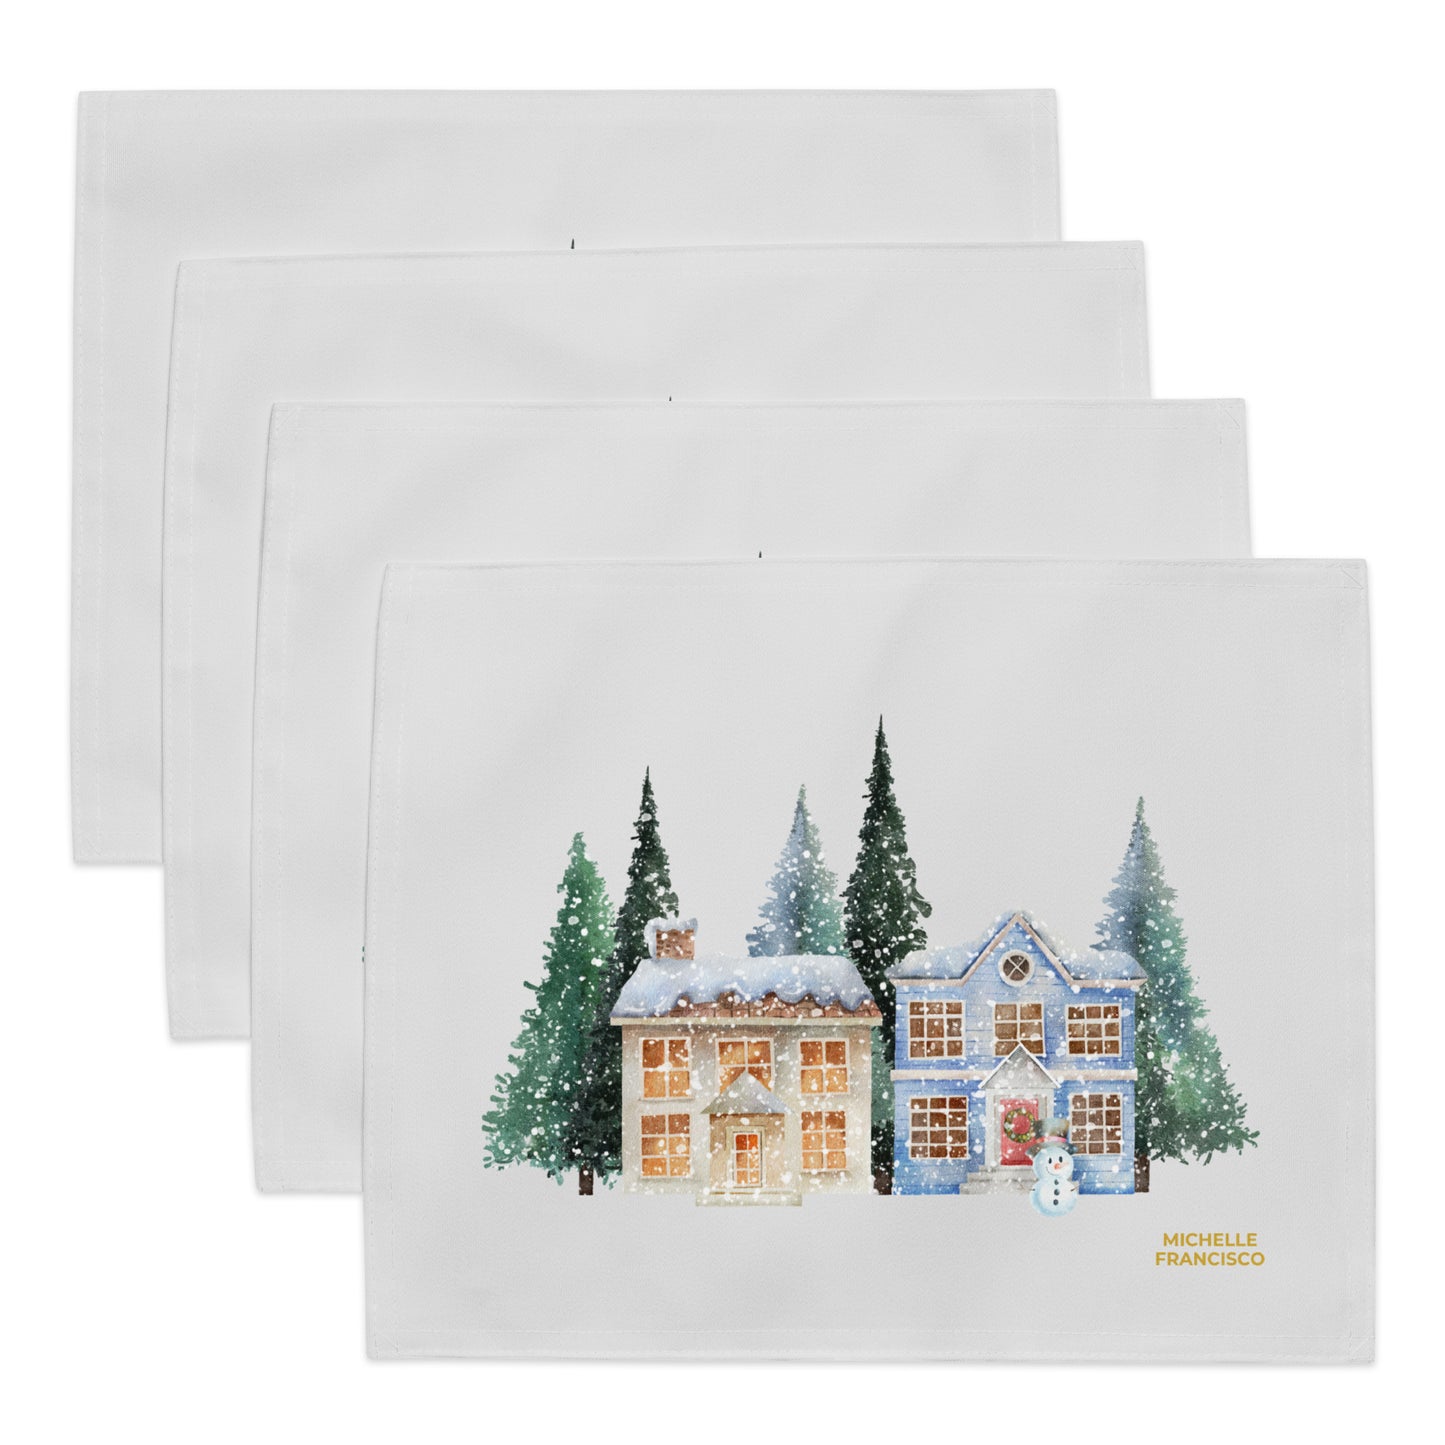 Cozy Christmas Home Placemat Set